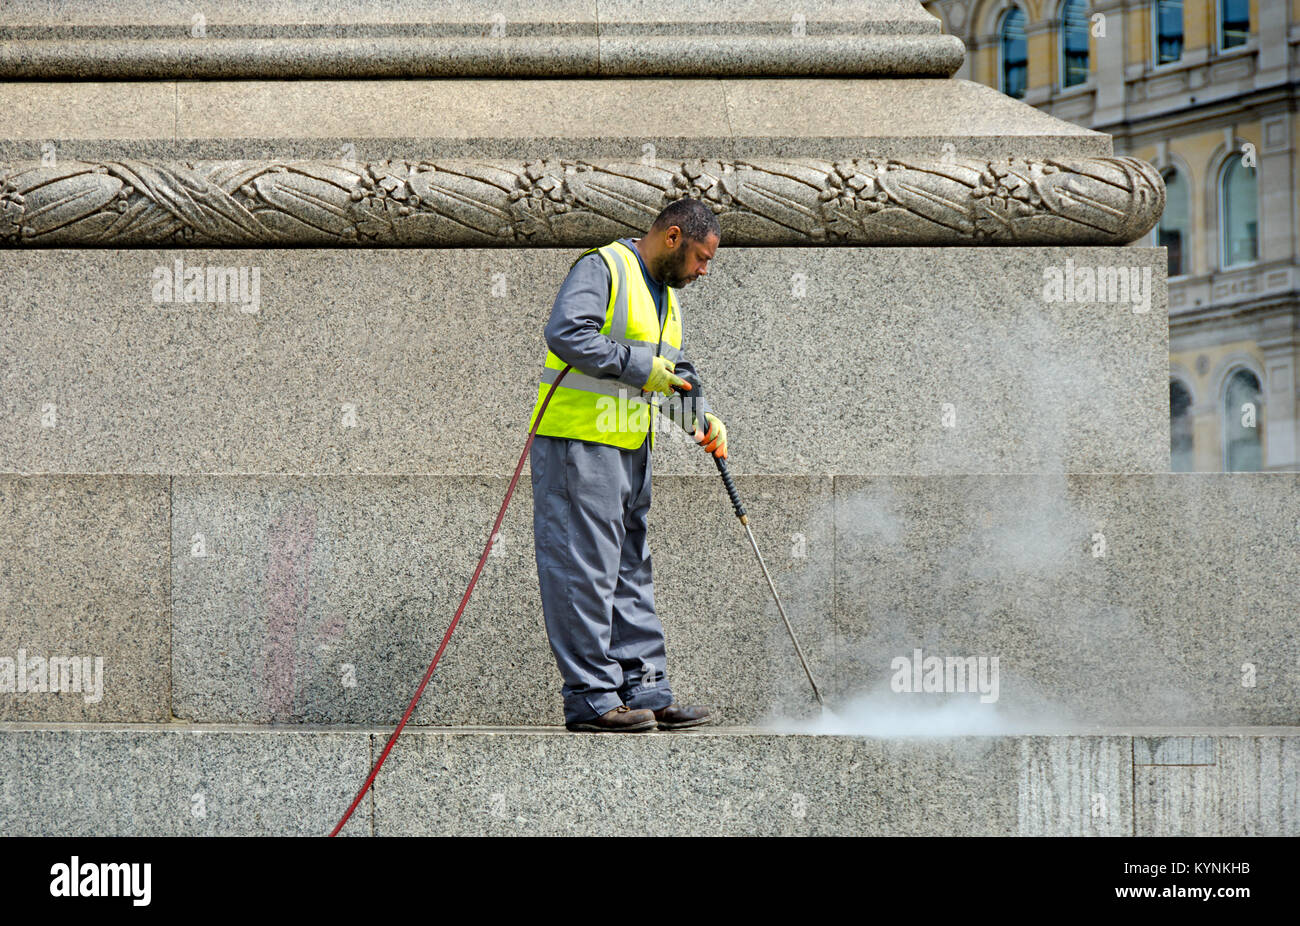 London, England, UK. Man cleaning the base of Nelson's Column with a pressure washer Stock Photo